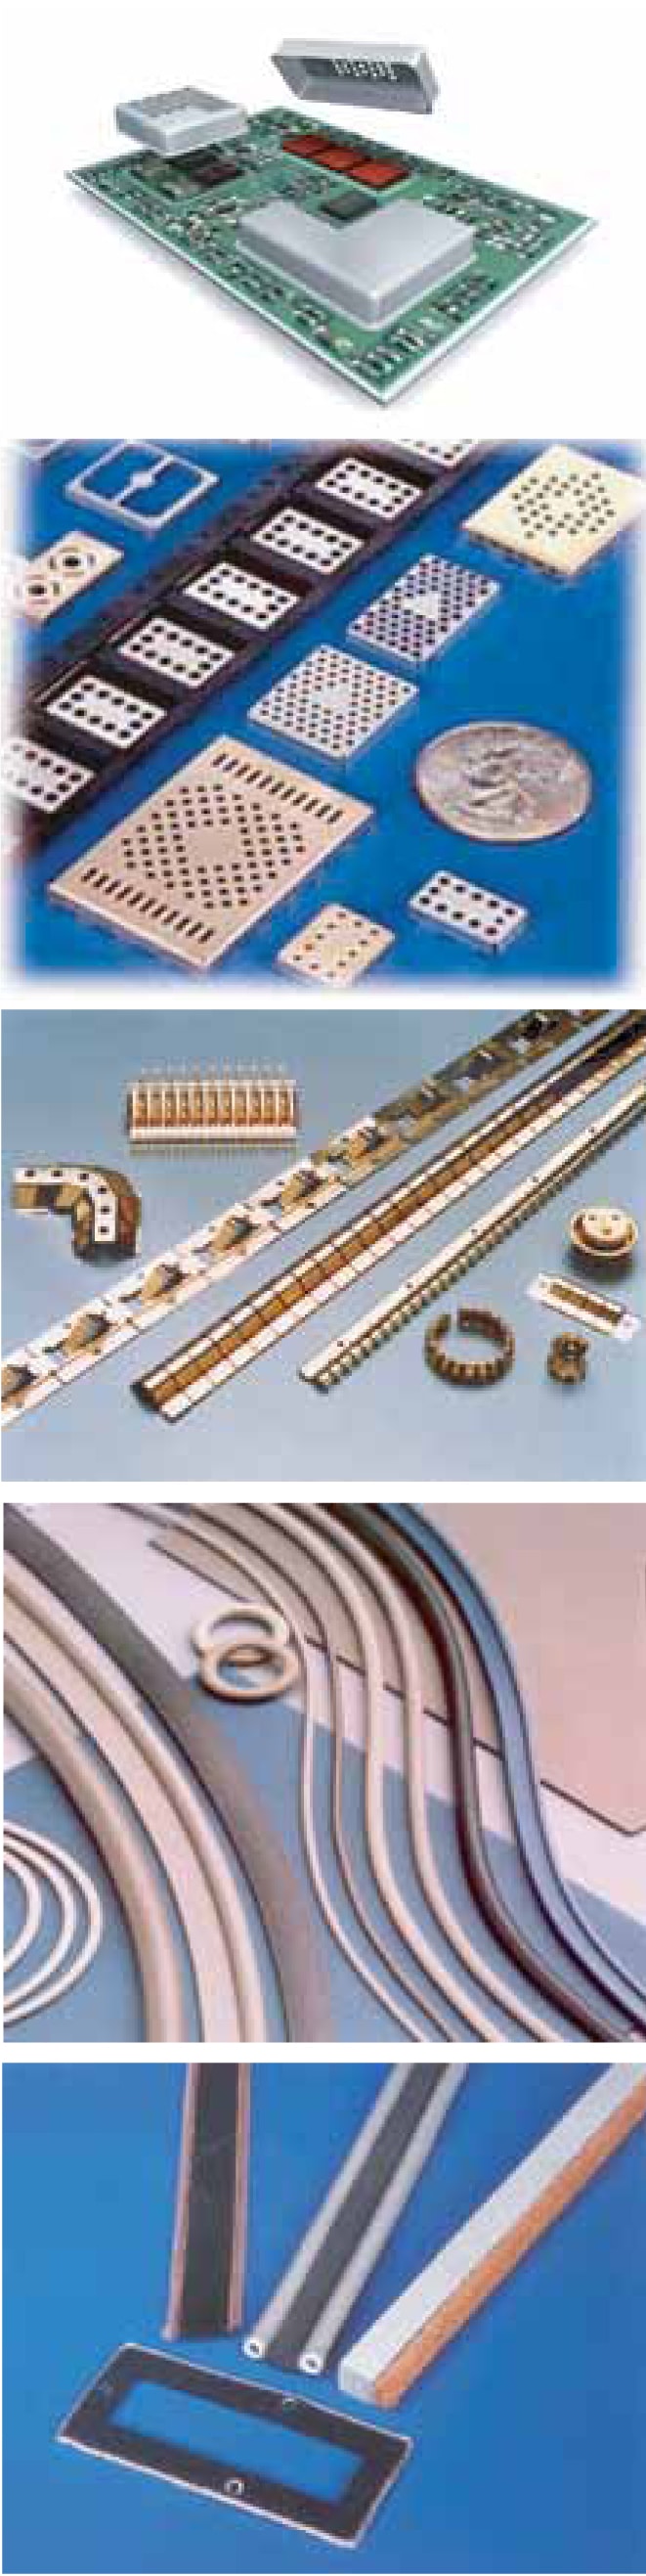 Figure 1. Typical shielding products.